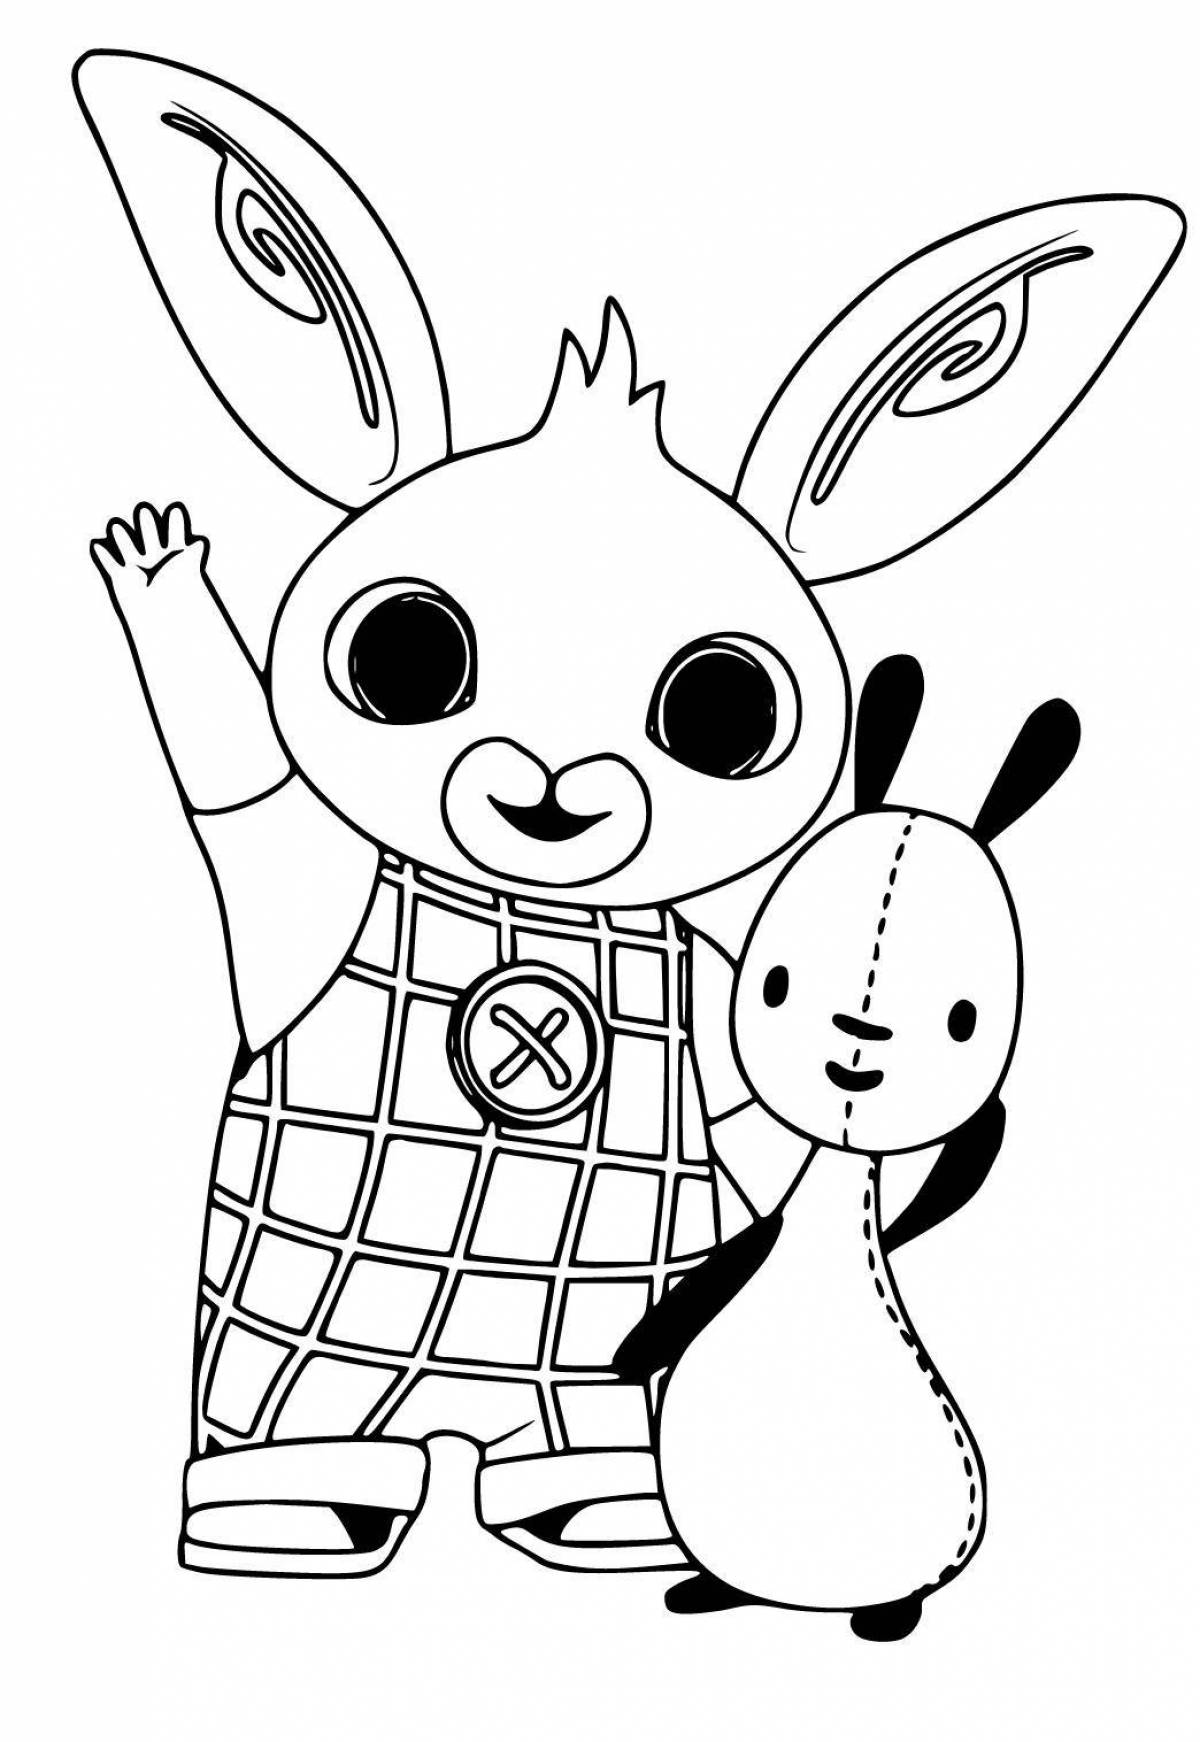 Bing cute coloring page